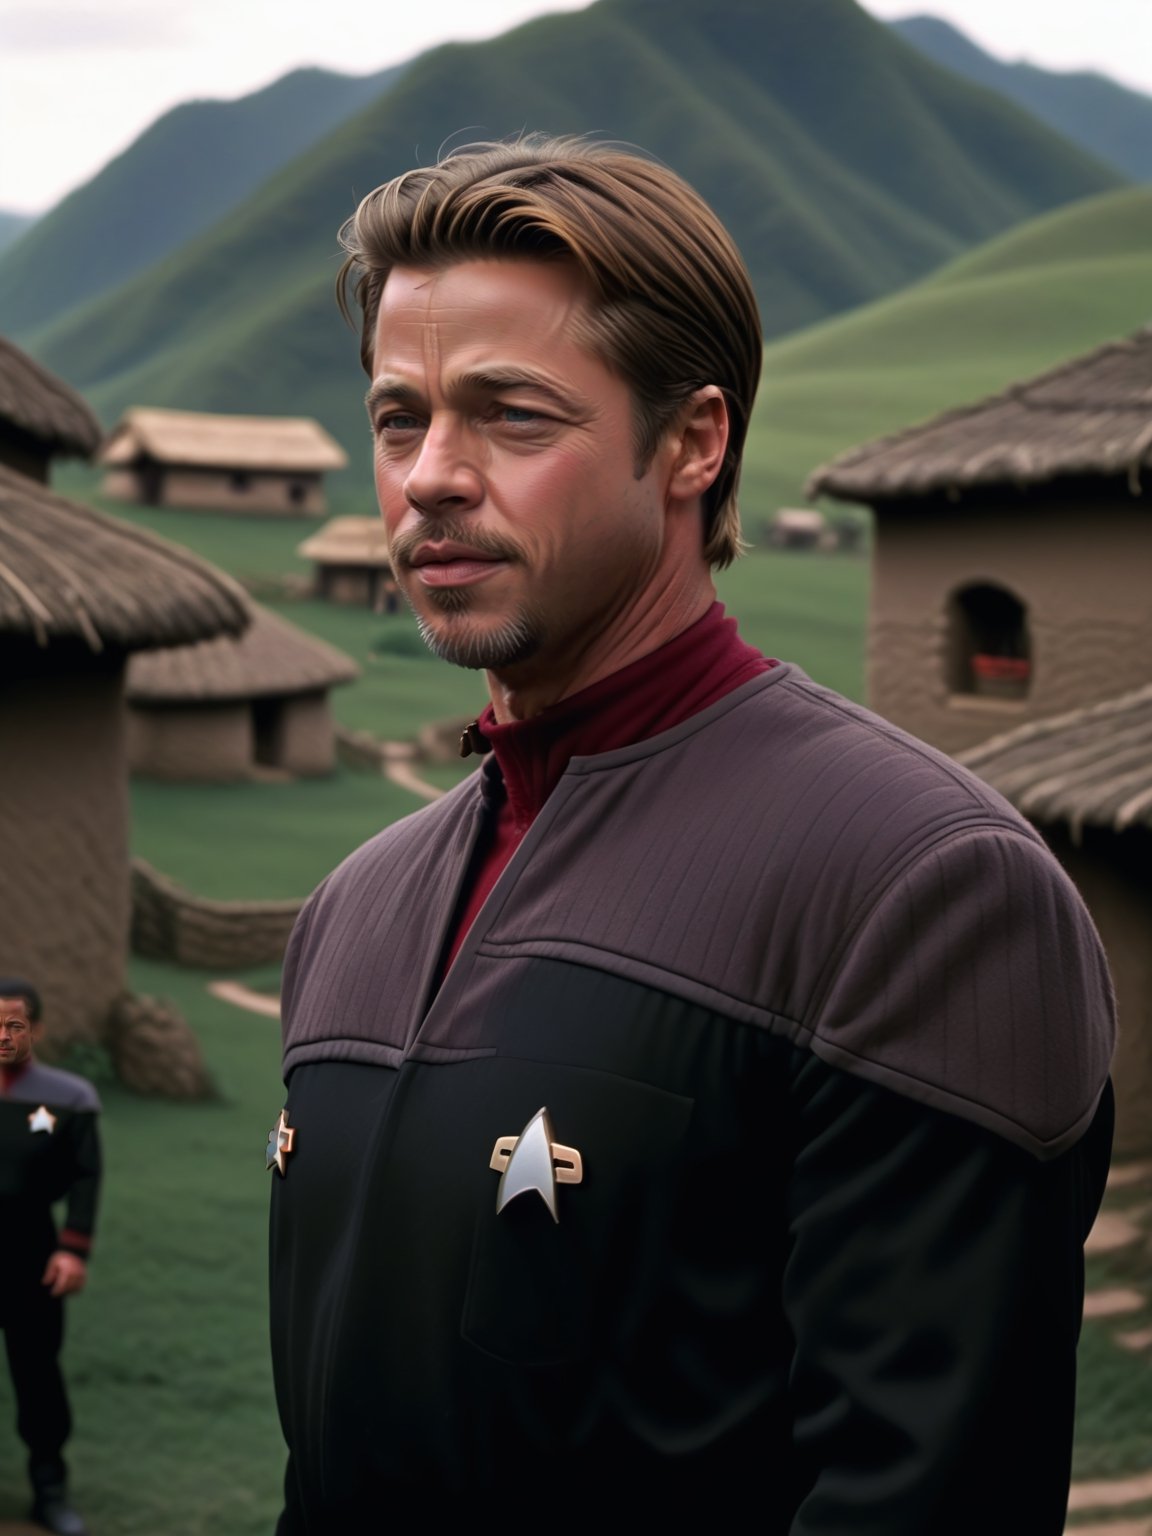 brad pitt in black and red ds9st uniform,in a village
